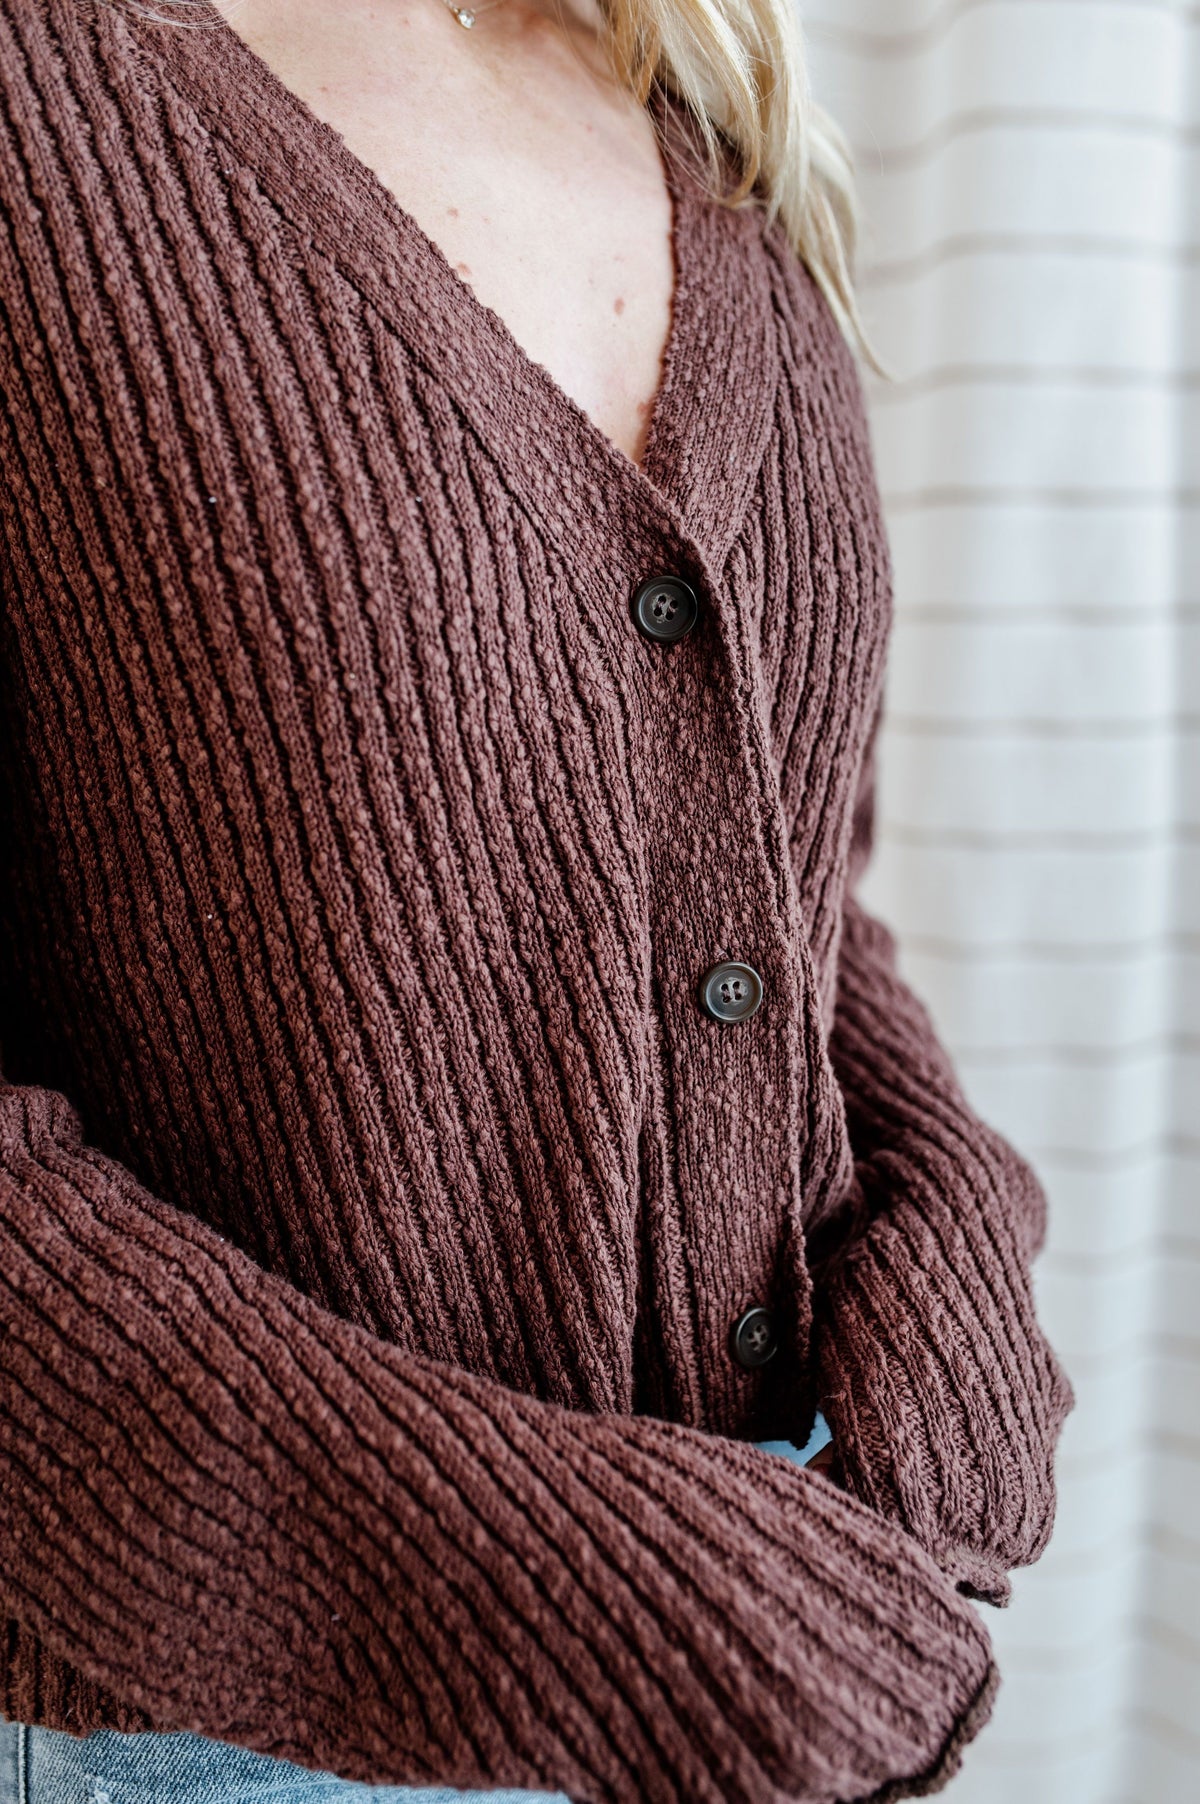 Pecan, knit cardigan sweater with v-neck button down front on model.